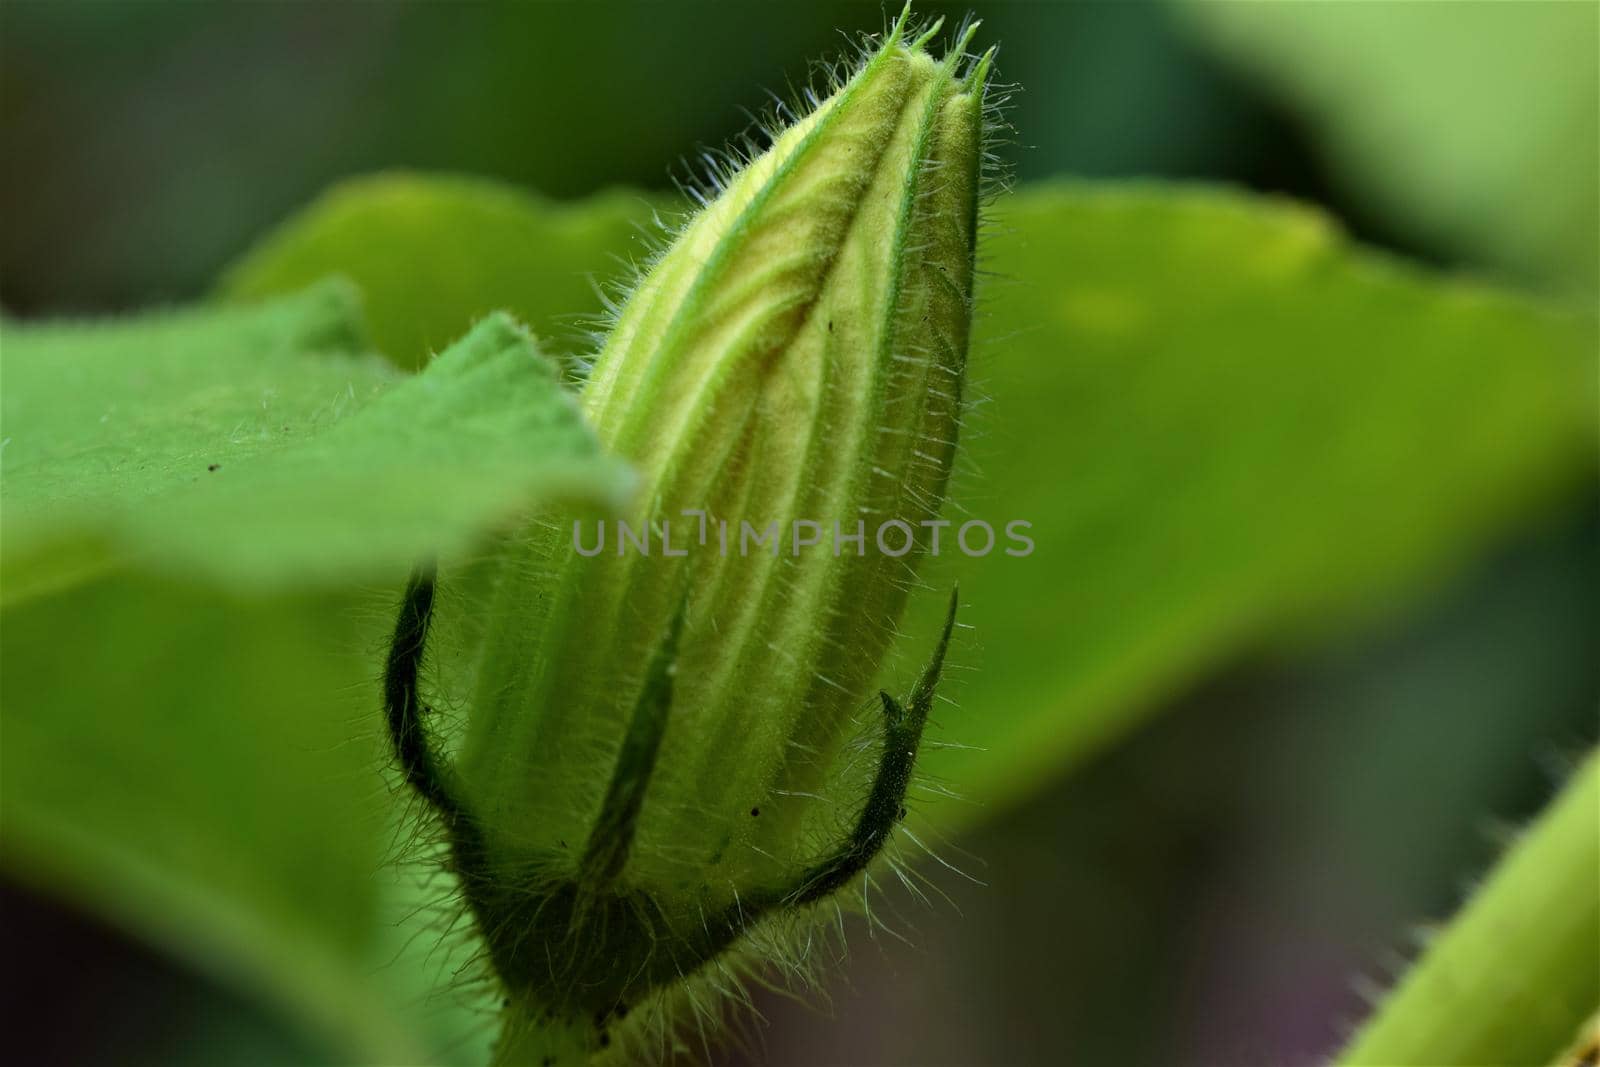 One green closed pumkin blossom against a blurred background